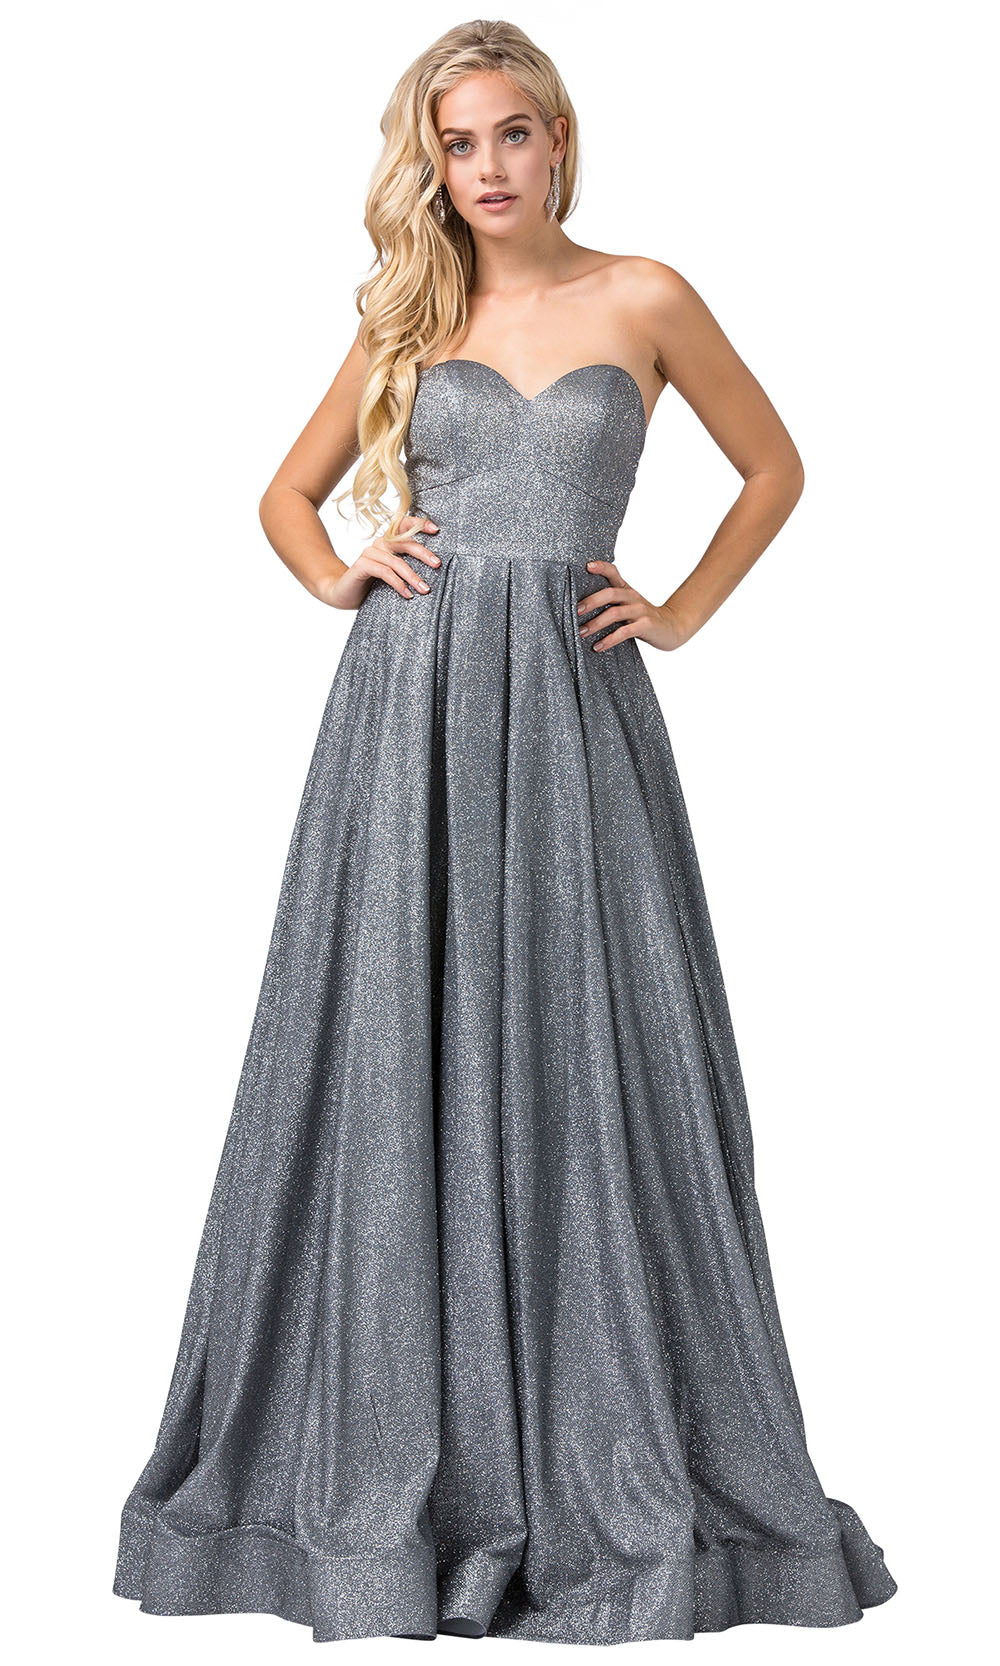 Dancing Queen - 2651 Strapless Shimmer Metallic A-Line Gown In Silver & Gray